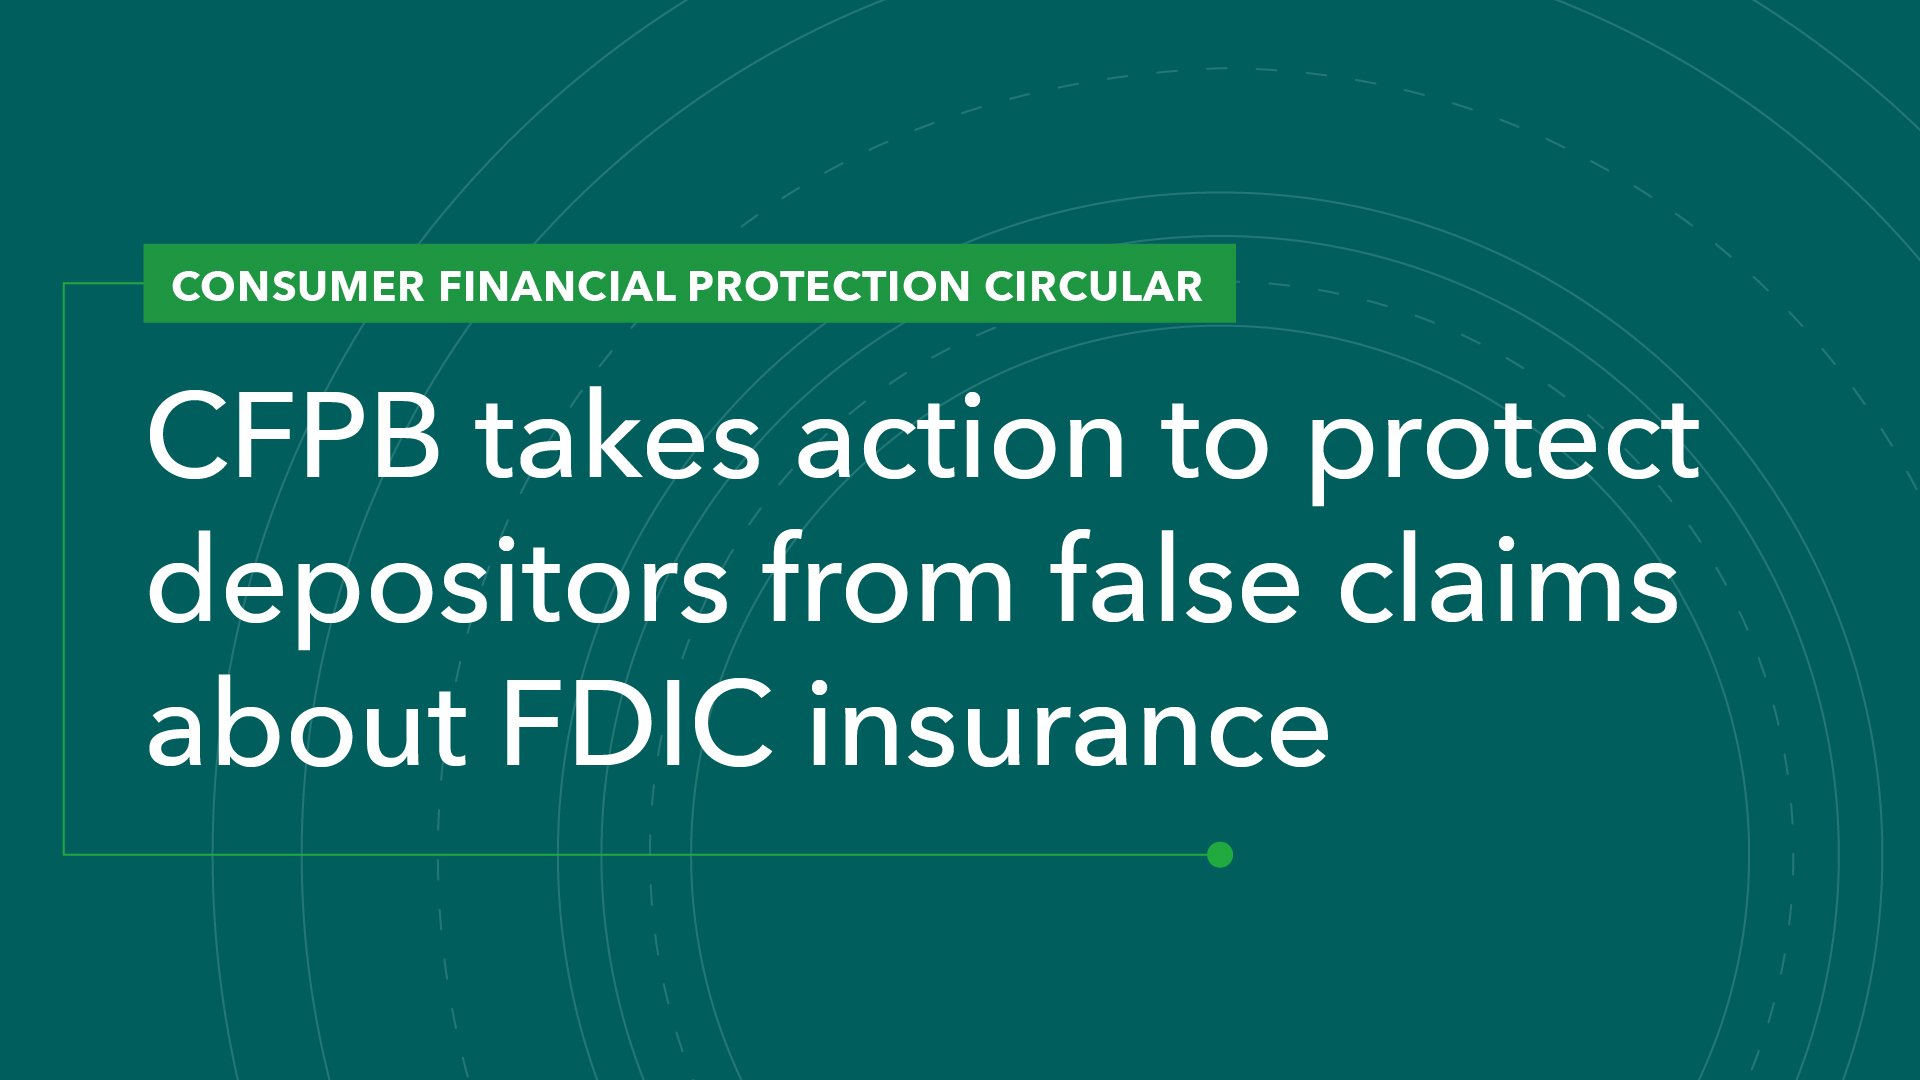 CFPB Takes Action to Protect Depositors from False Claims About FDIC Insurance